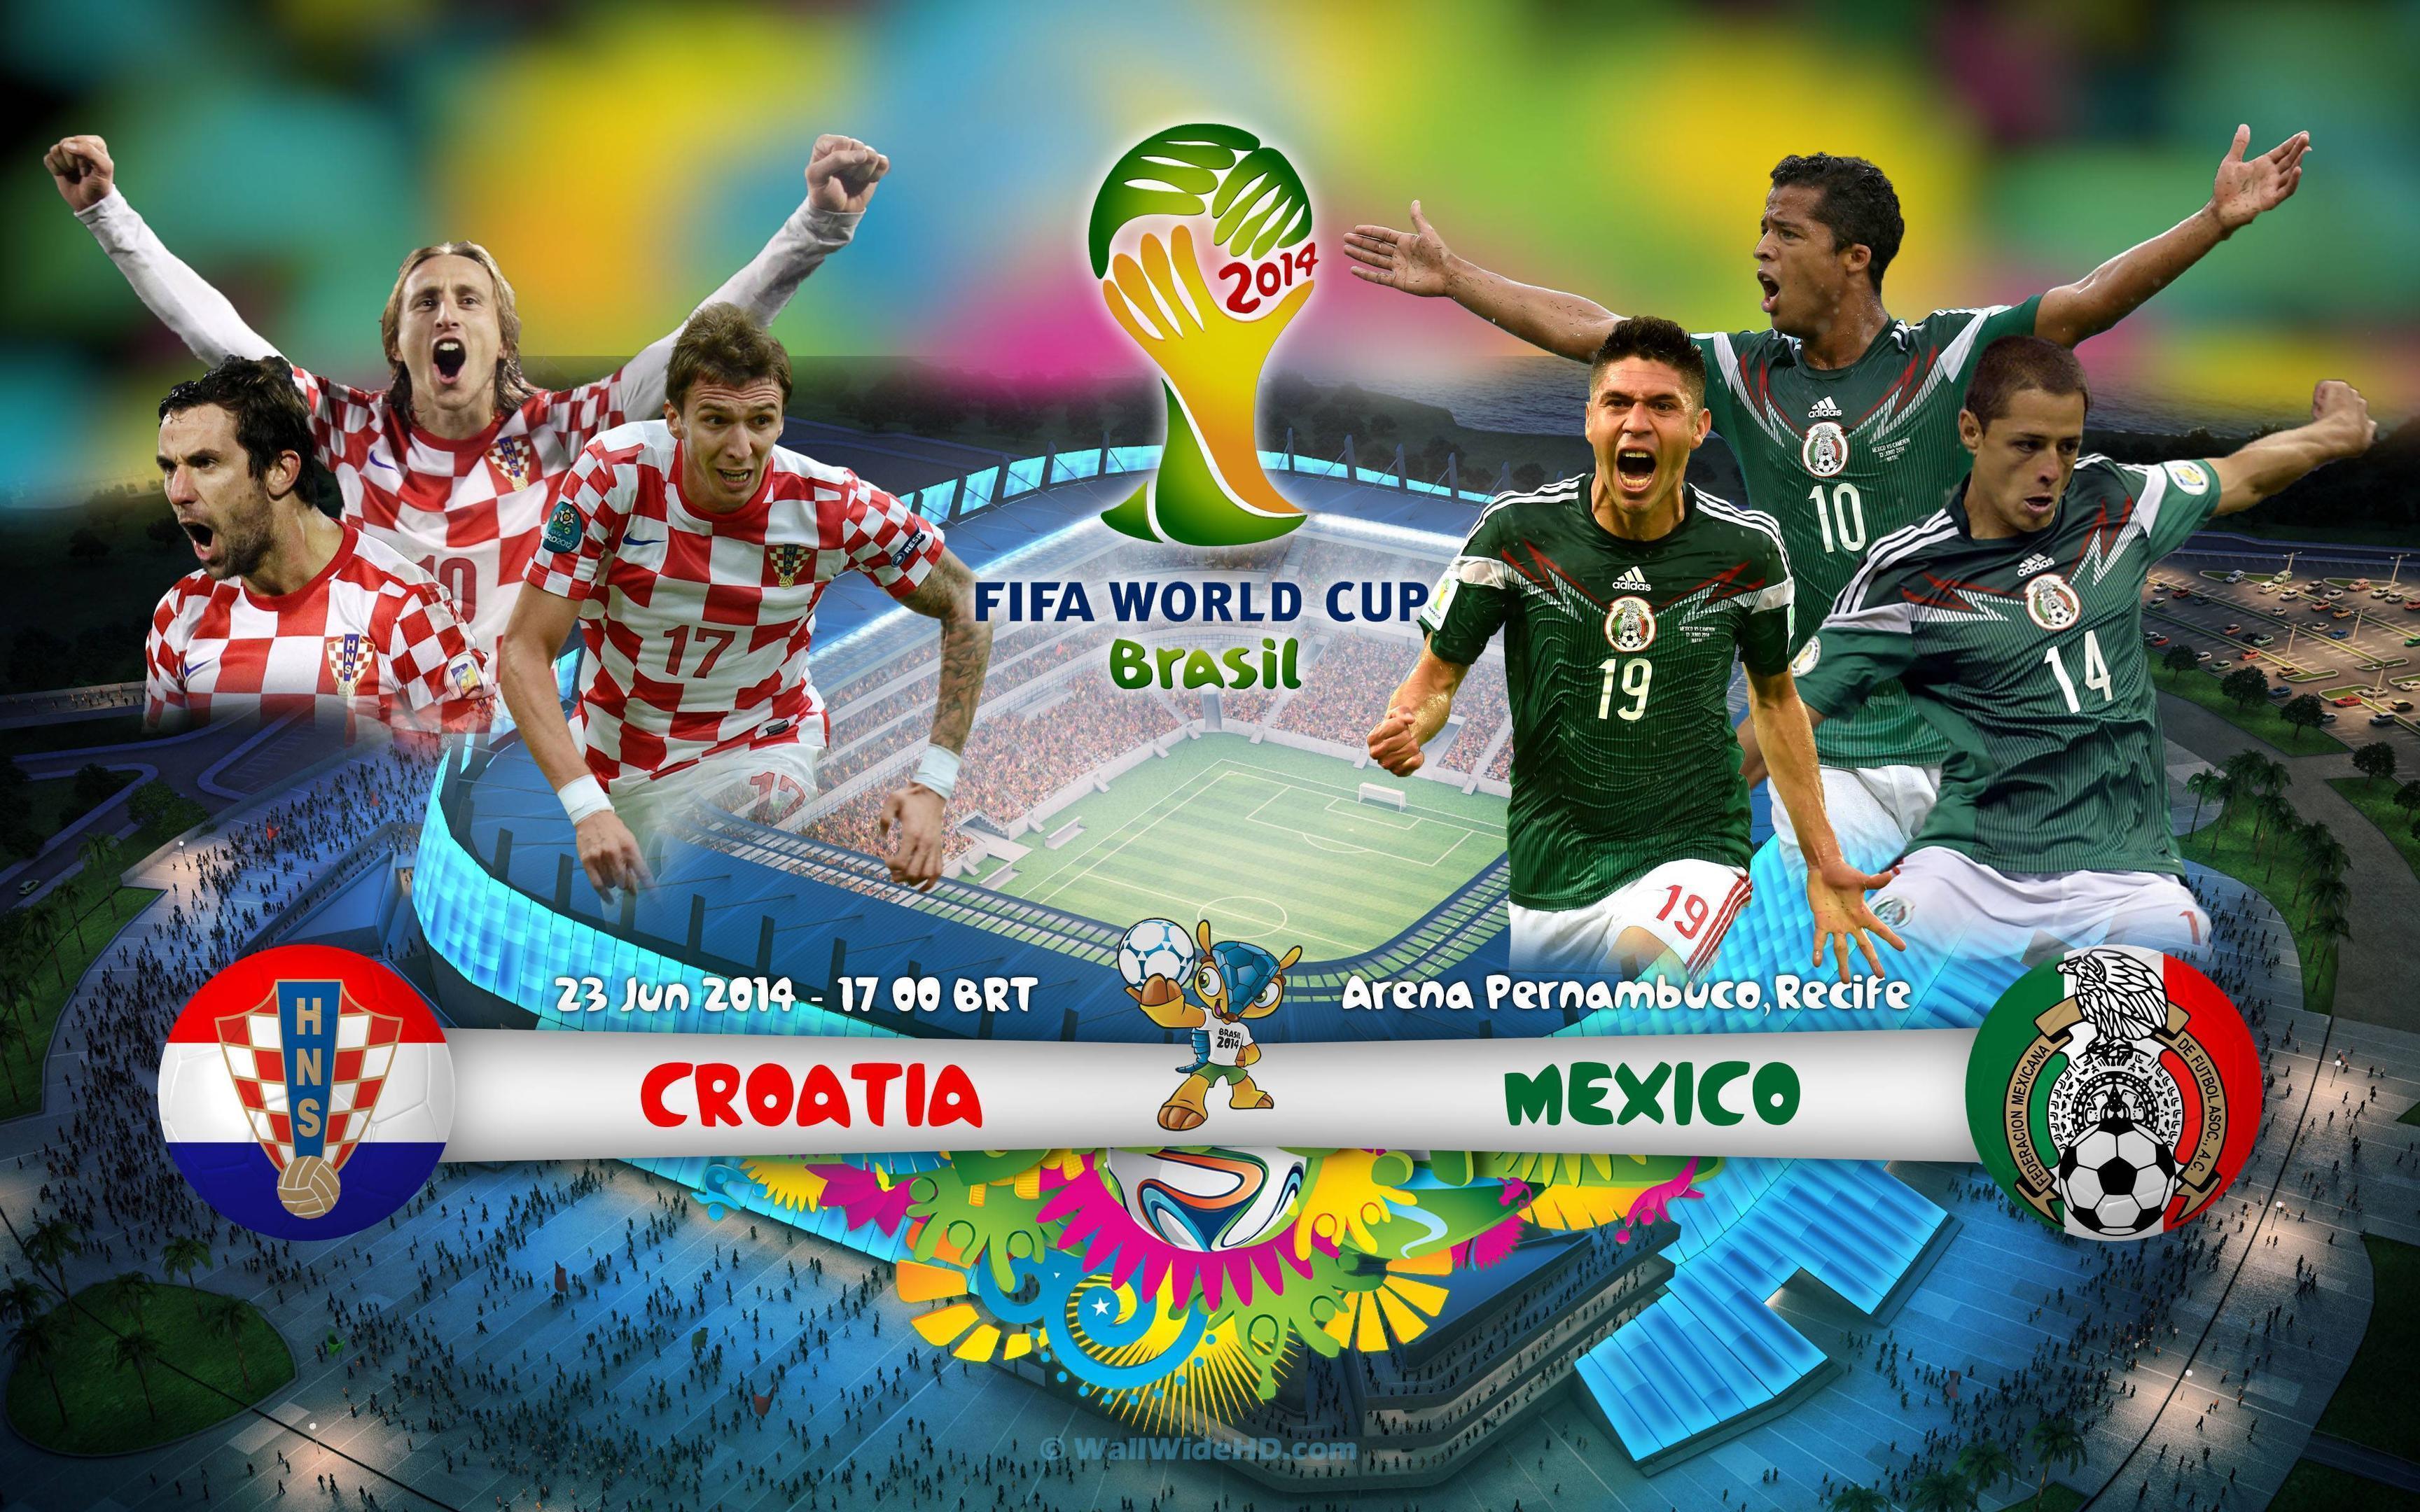 Croatia vs Mexico 2014 World Cup Group A Football Match Wallpapers